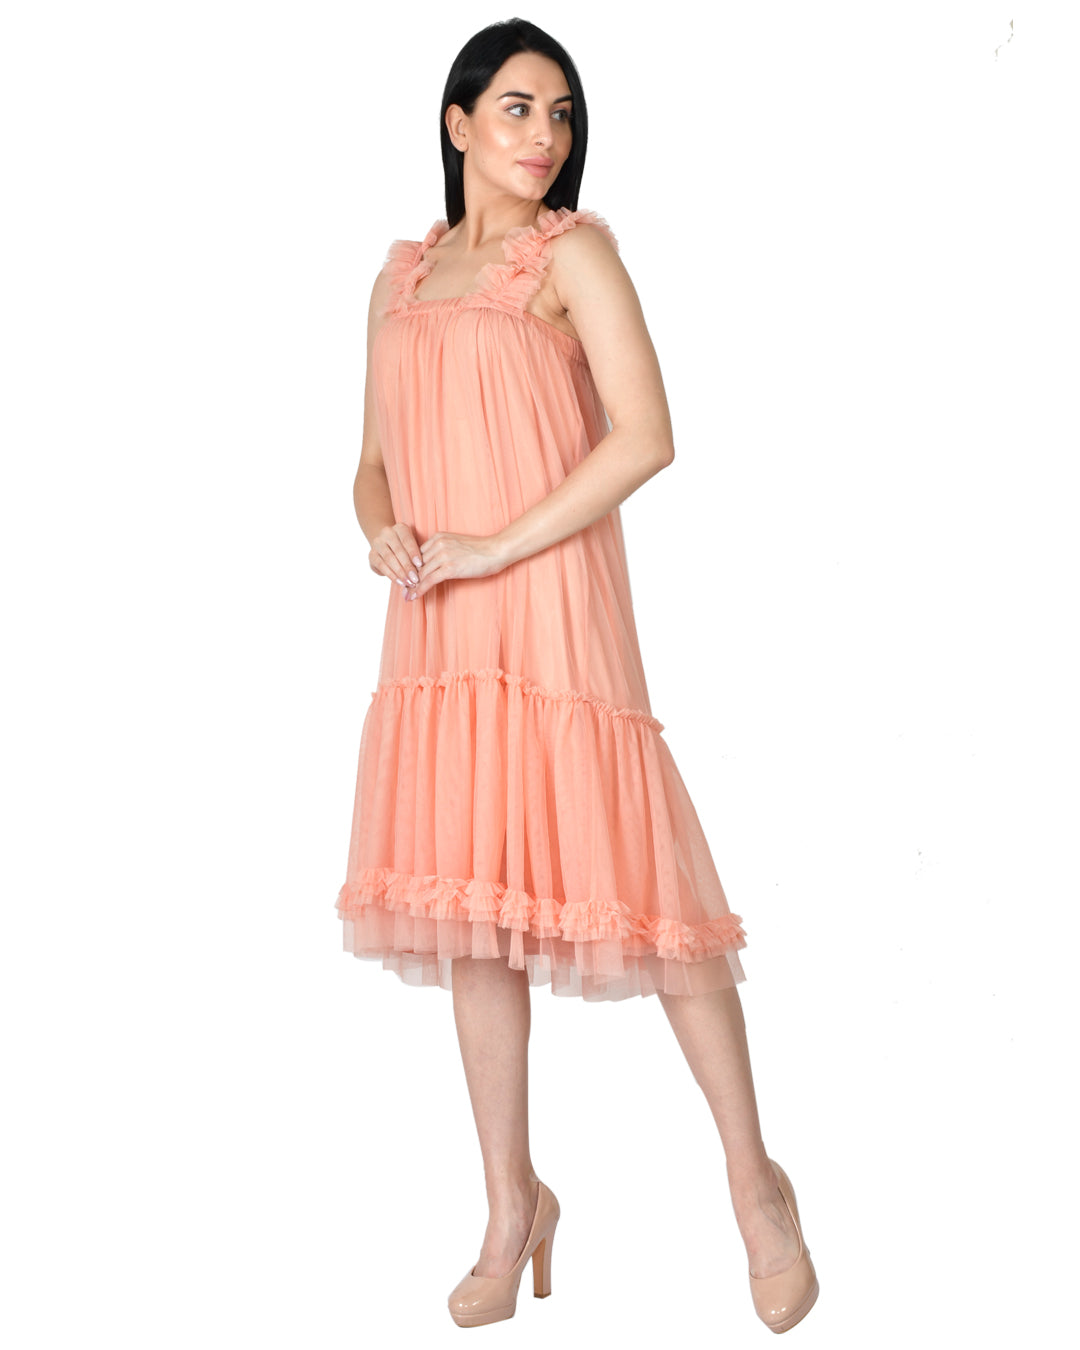 FRILLY PARTY DRESS IN A SOFT PEACH